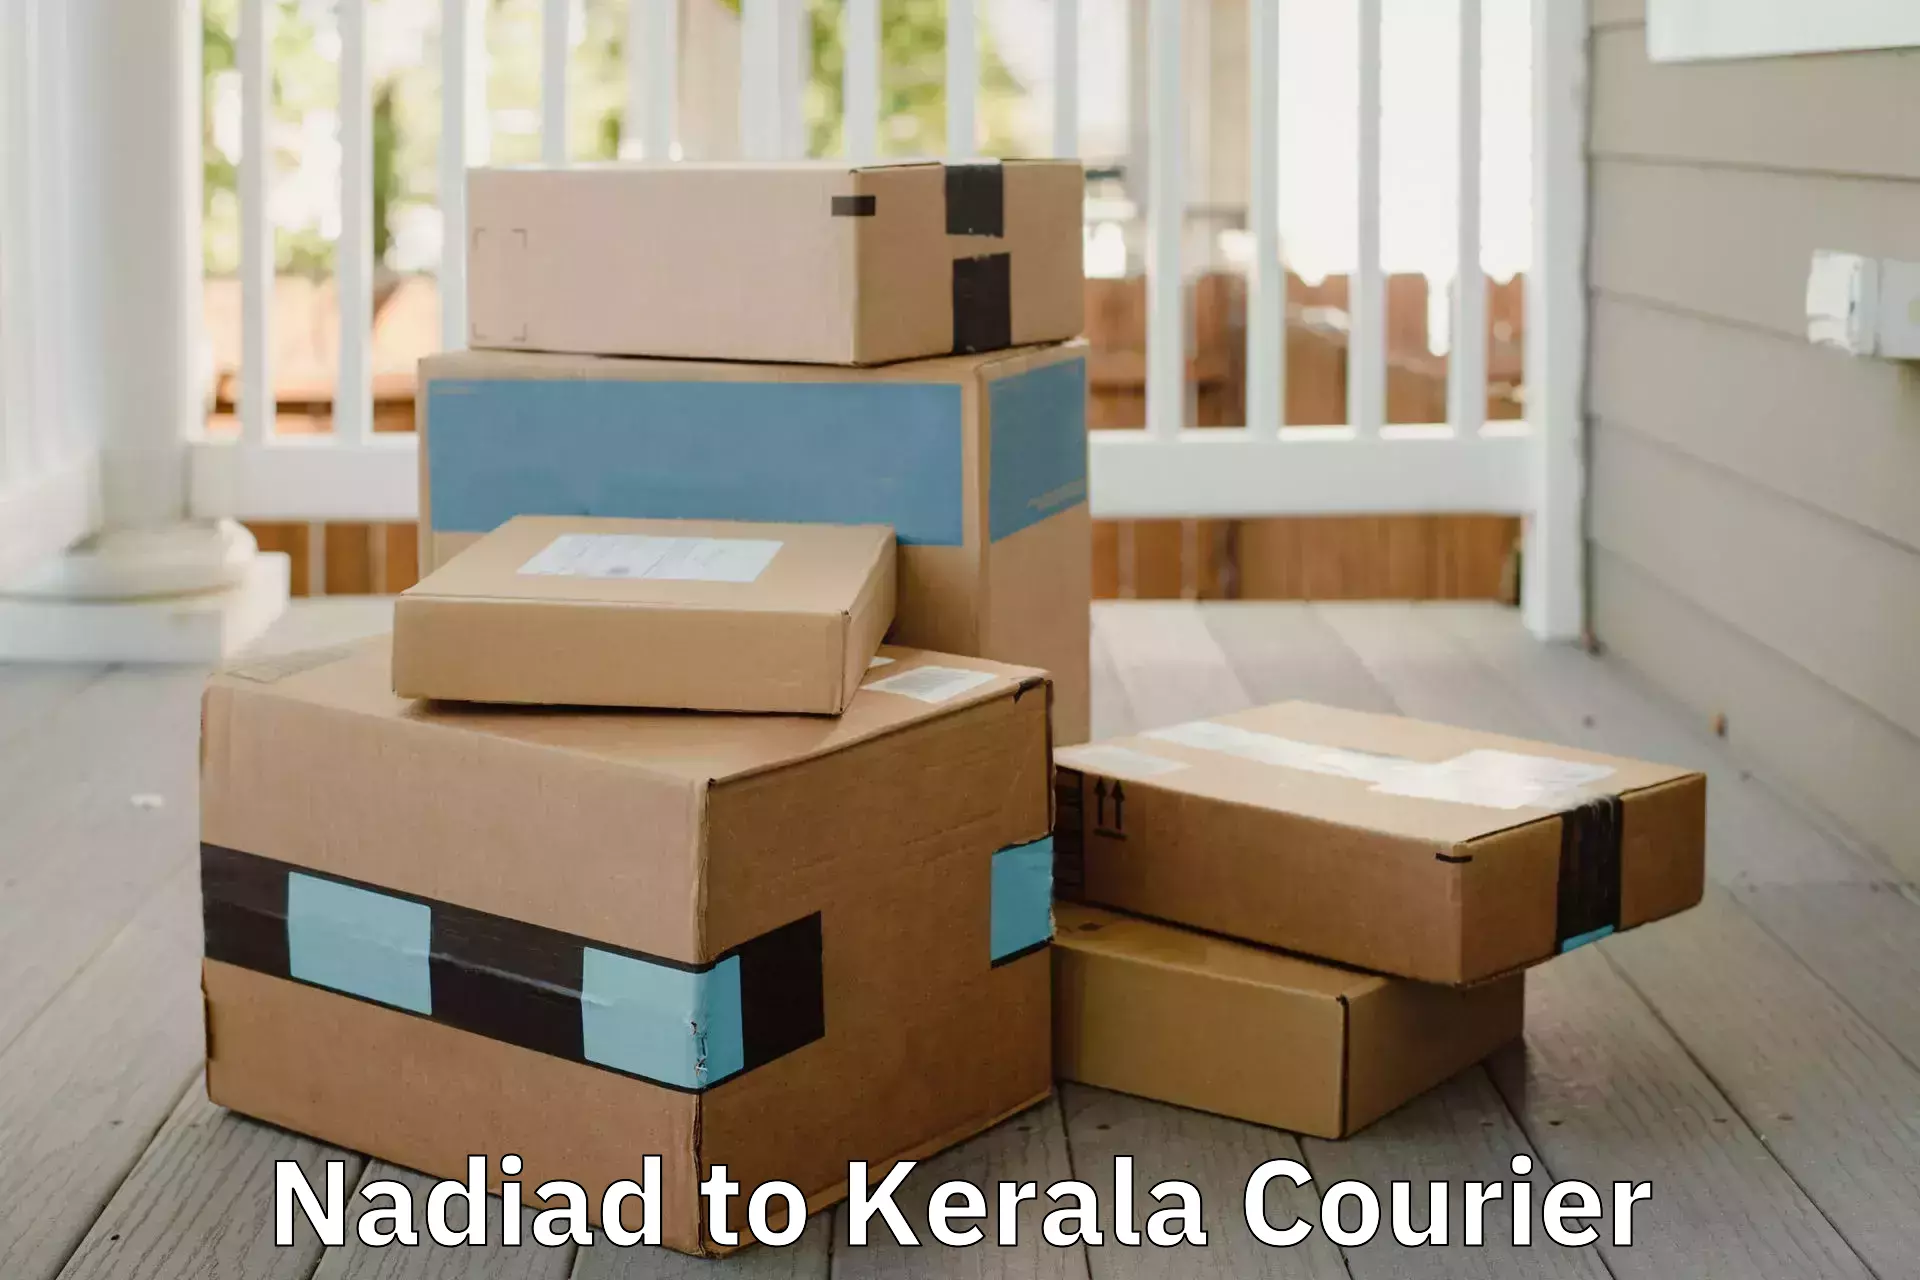 Household moving experts Nadiad to Kochi